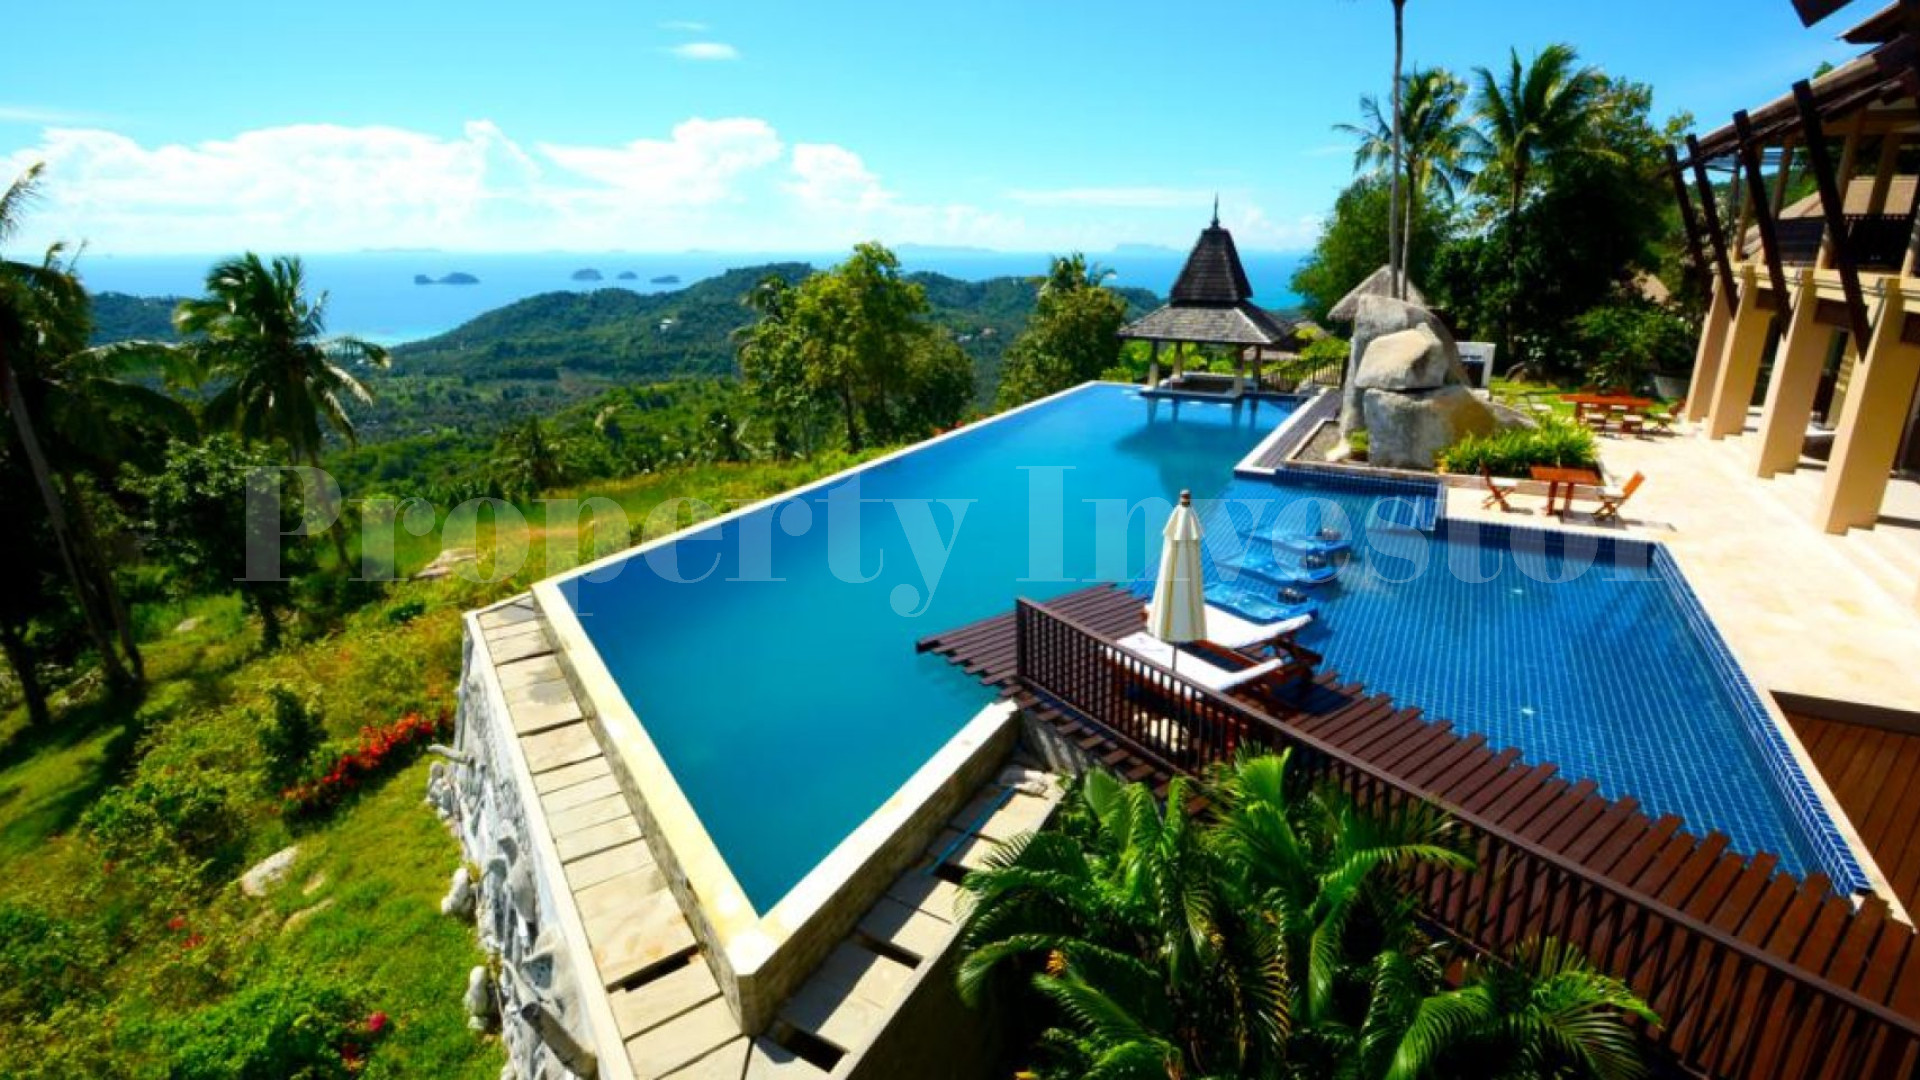 Stunning 6 Bedroom  Luxury Hillside Villa with Amazing Panoramic Views for Sale in Koh Samui, Thailand